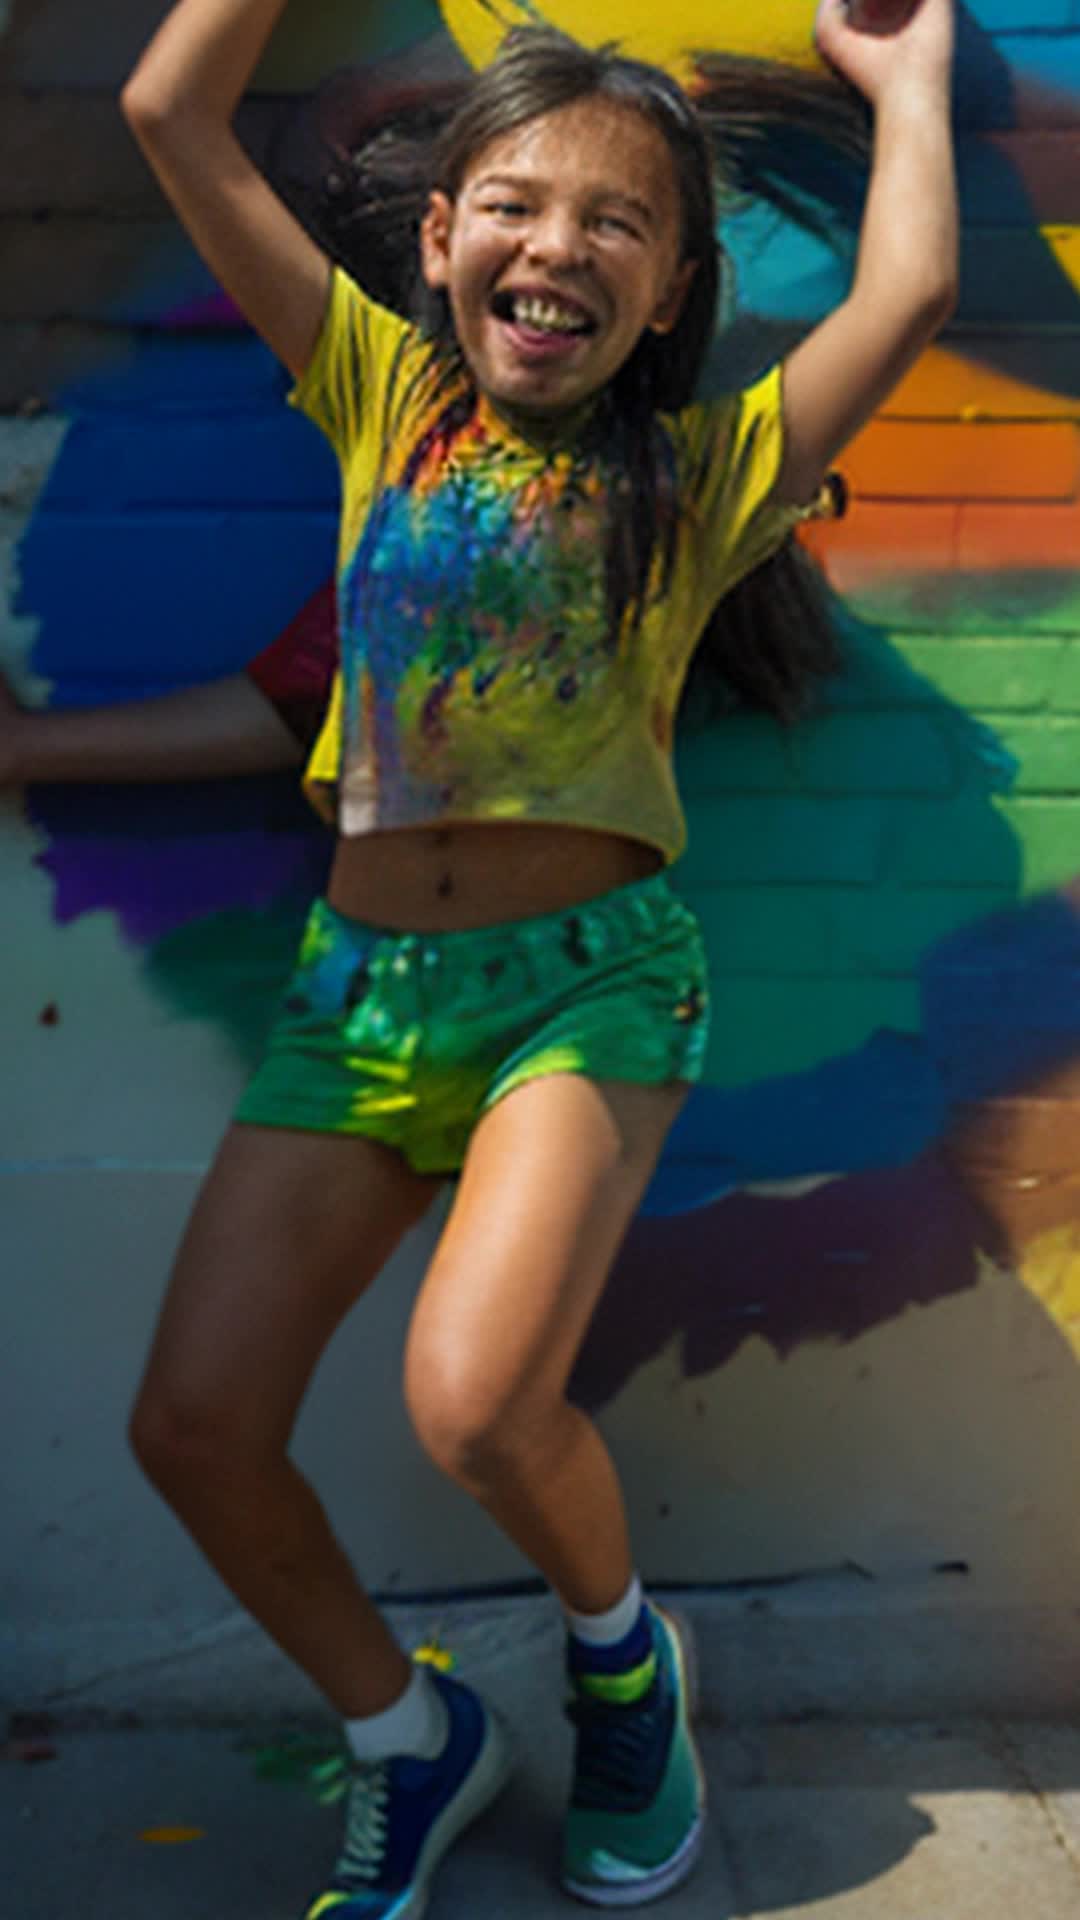 Energetic 10-year-olds splashing vibrant colors, paint-drenched brushes, dull brick wall transforming, quirky local artist guiding, orchestrating dance, drab to vibrant mural, soft shadows, high resolution, wide-angle shot